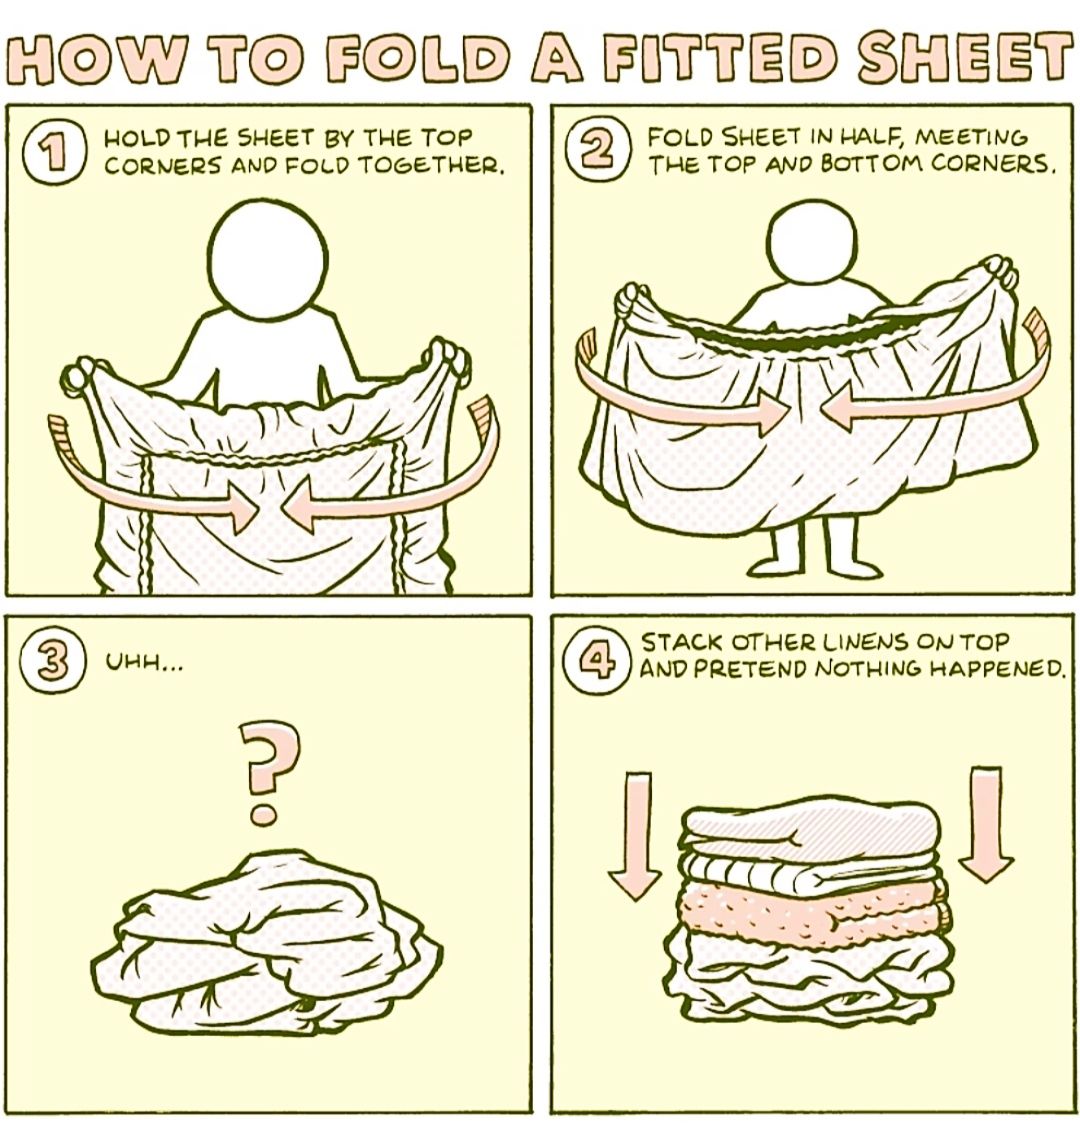 Set of instructions I found in the description box of a fitted bedsheet while browsing through stuff